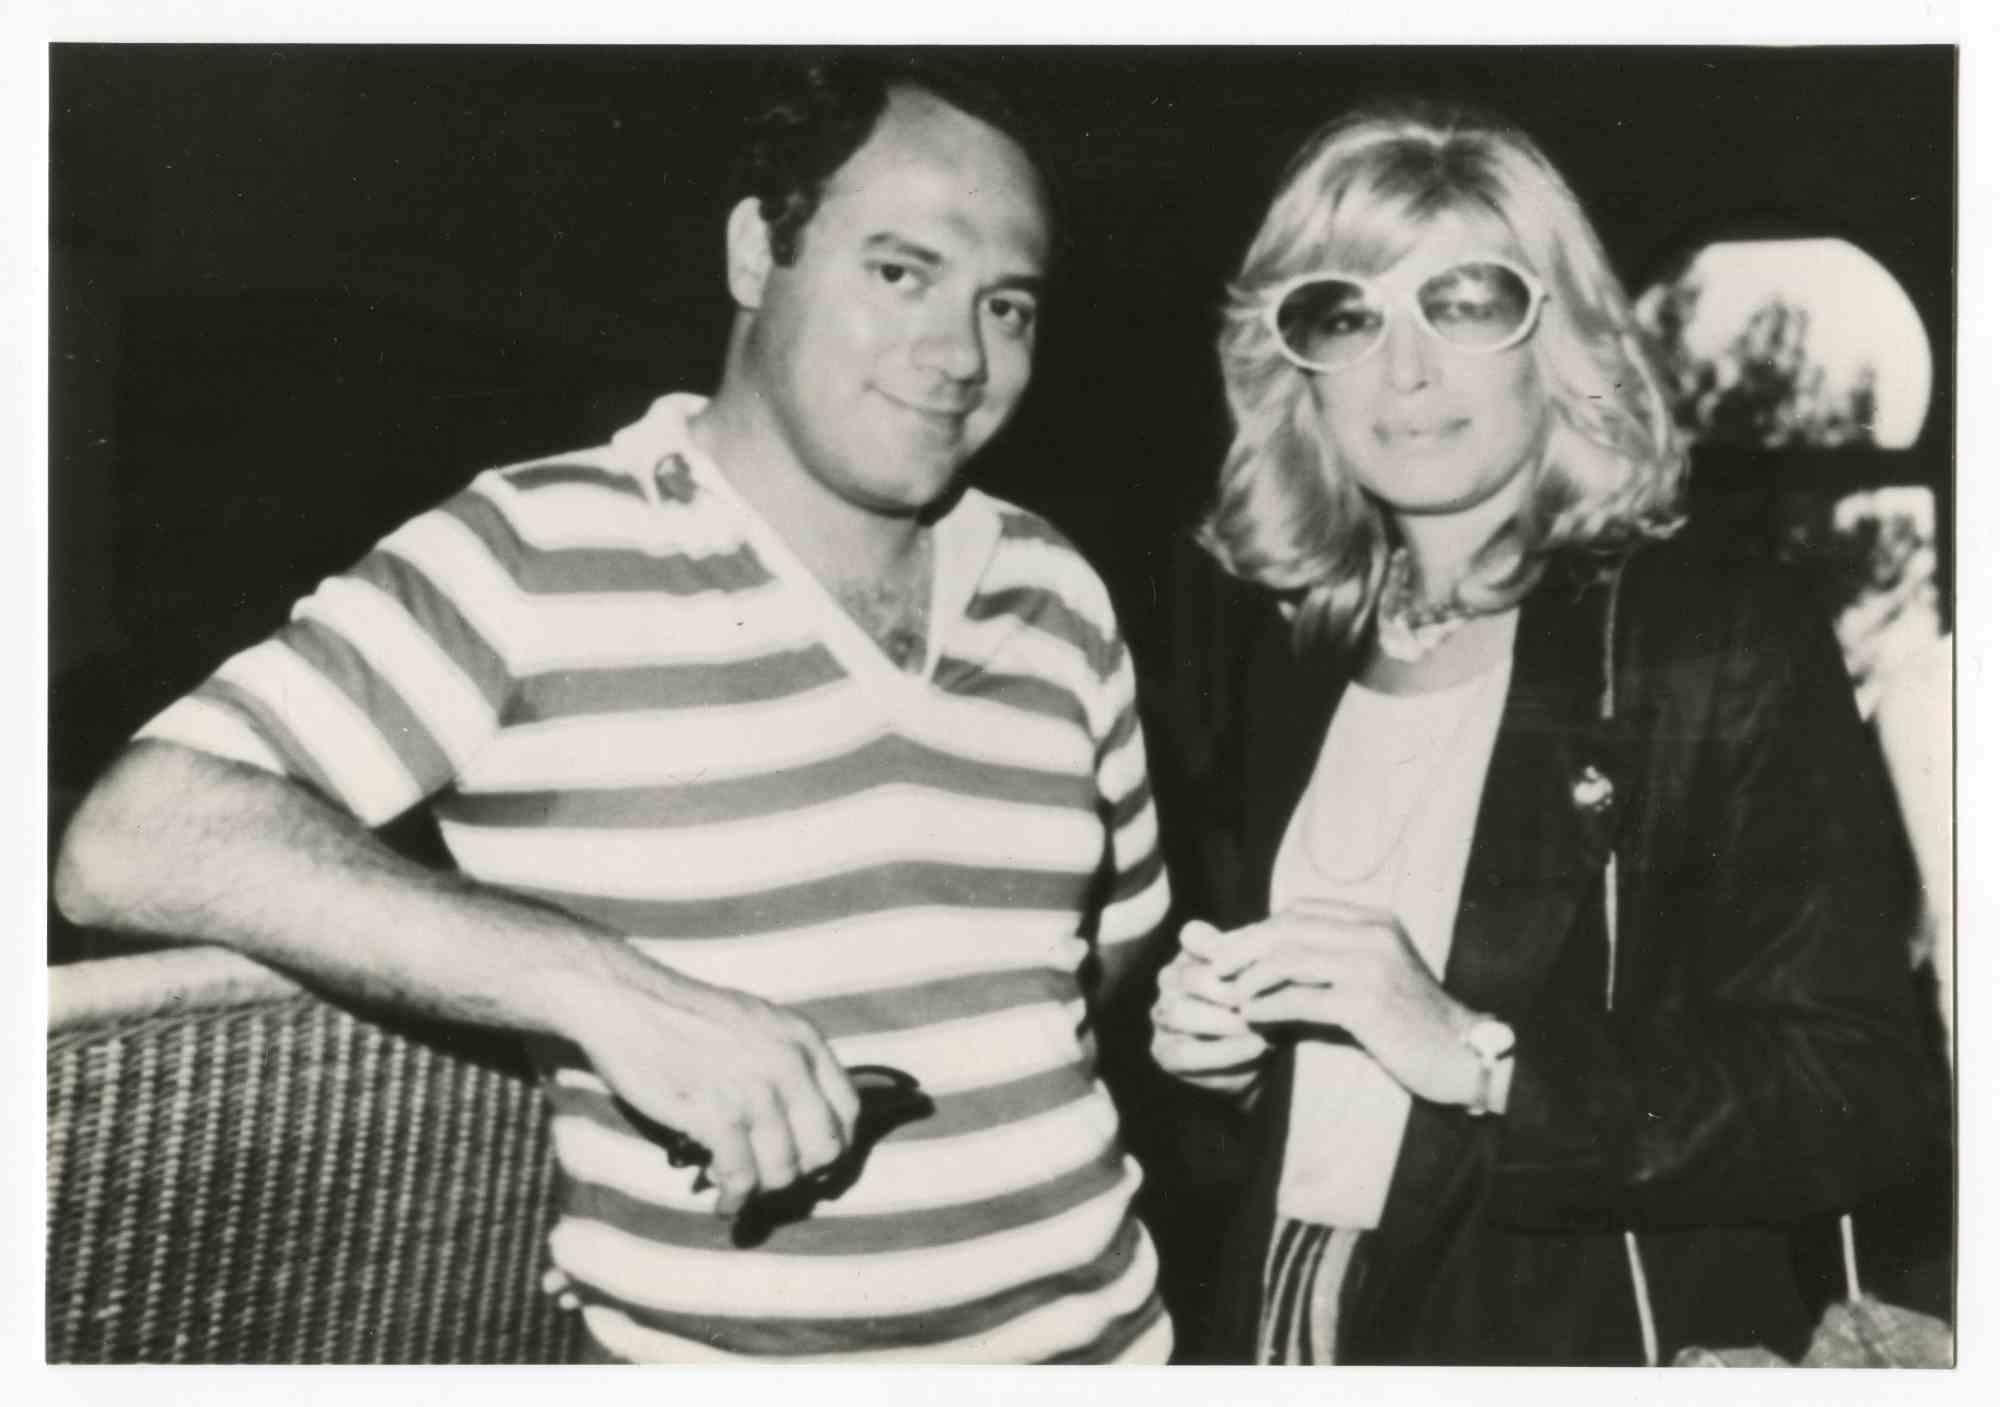 Unknown Black and White Photograph - Monica Vitti and Carlo Verdone - Vintage Black and White Photo - 1980s